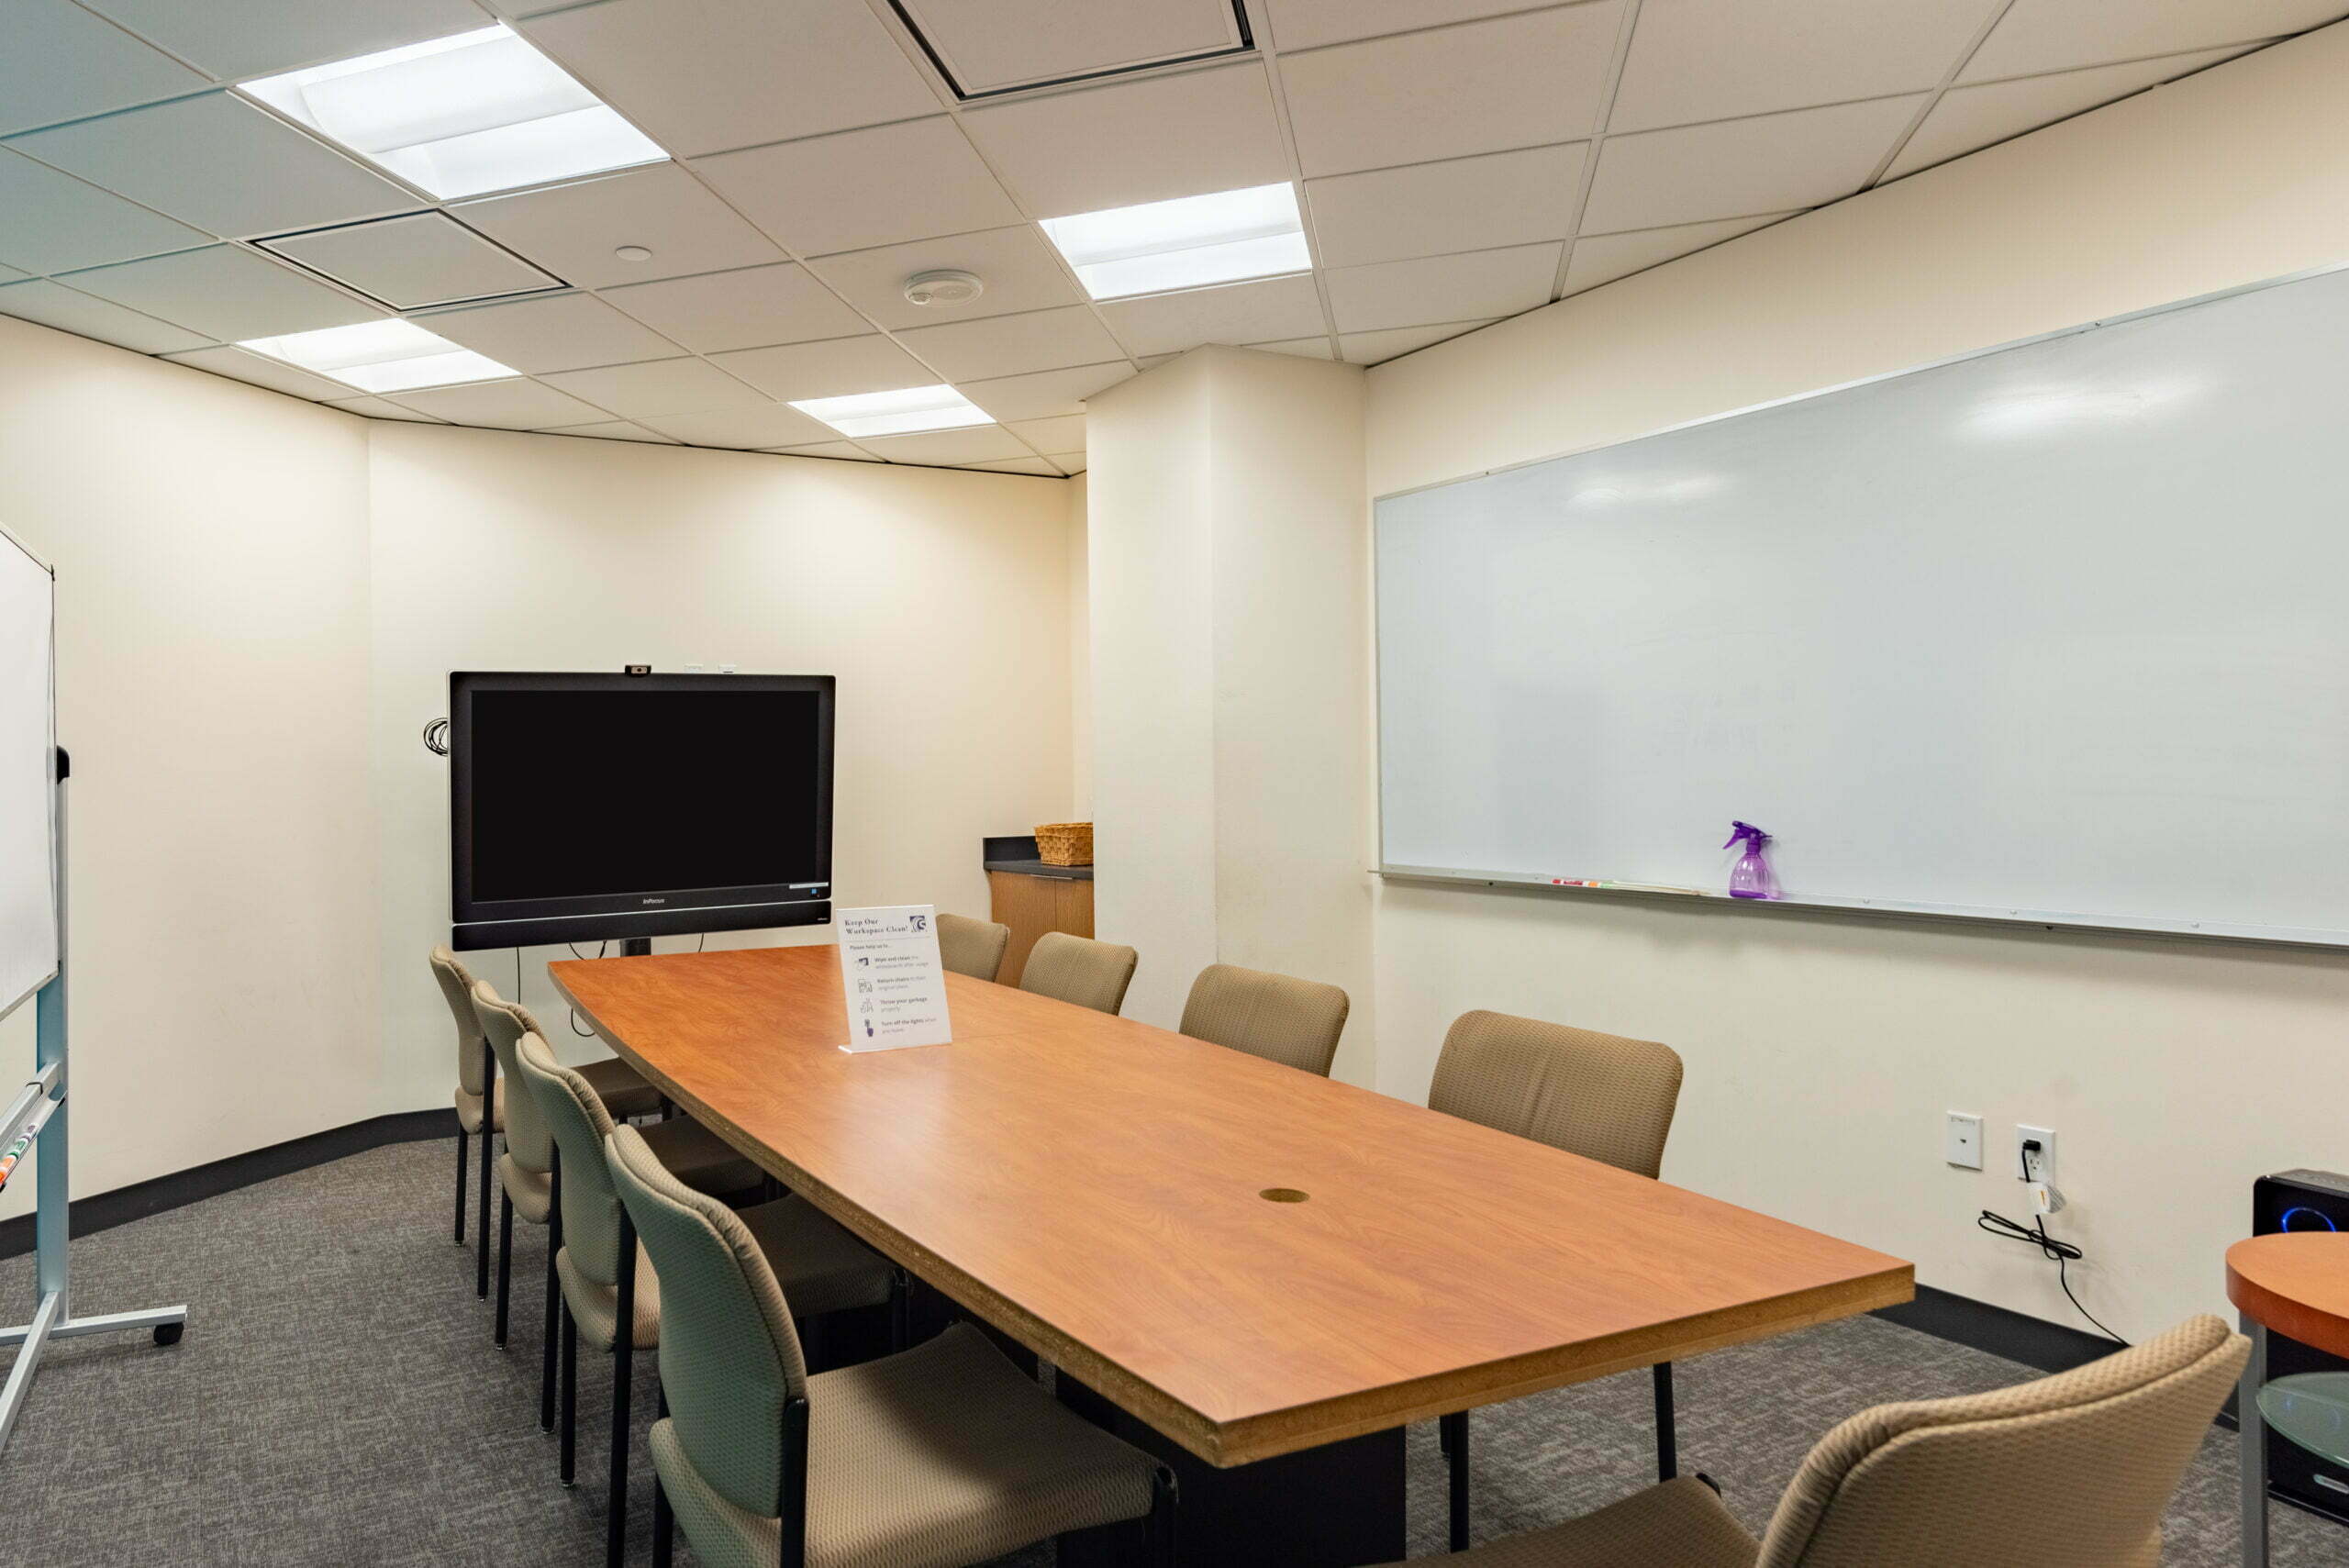 Oahu conference room for rent at SURF Incubator in downtown Seattle Washington